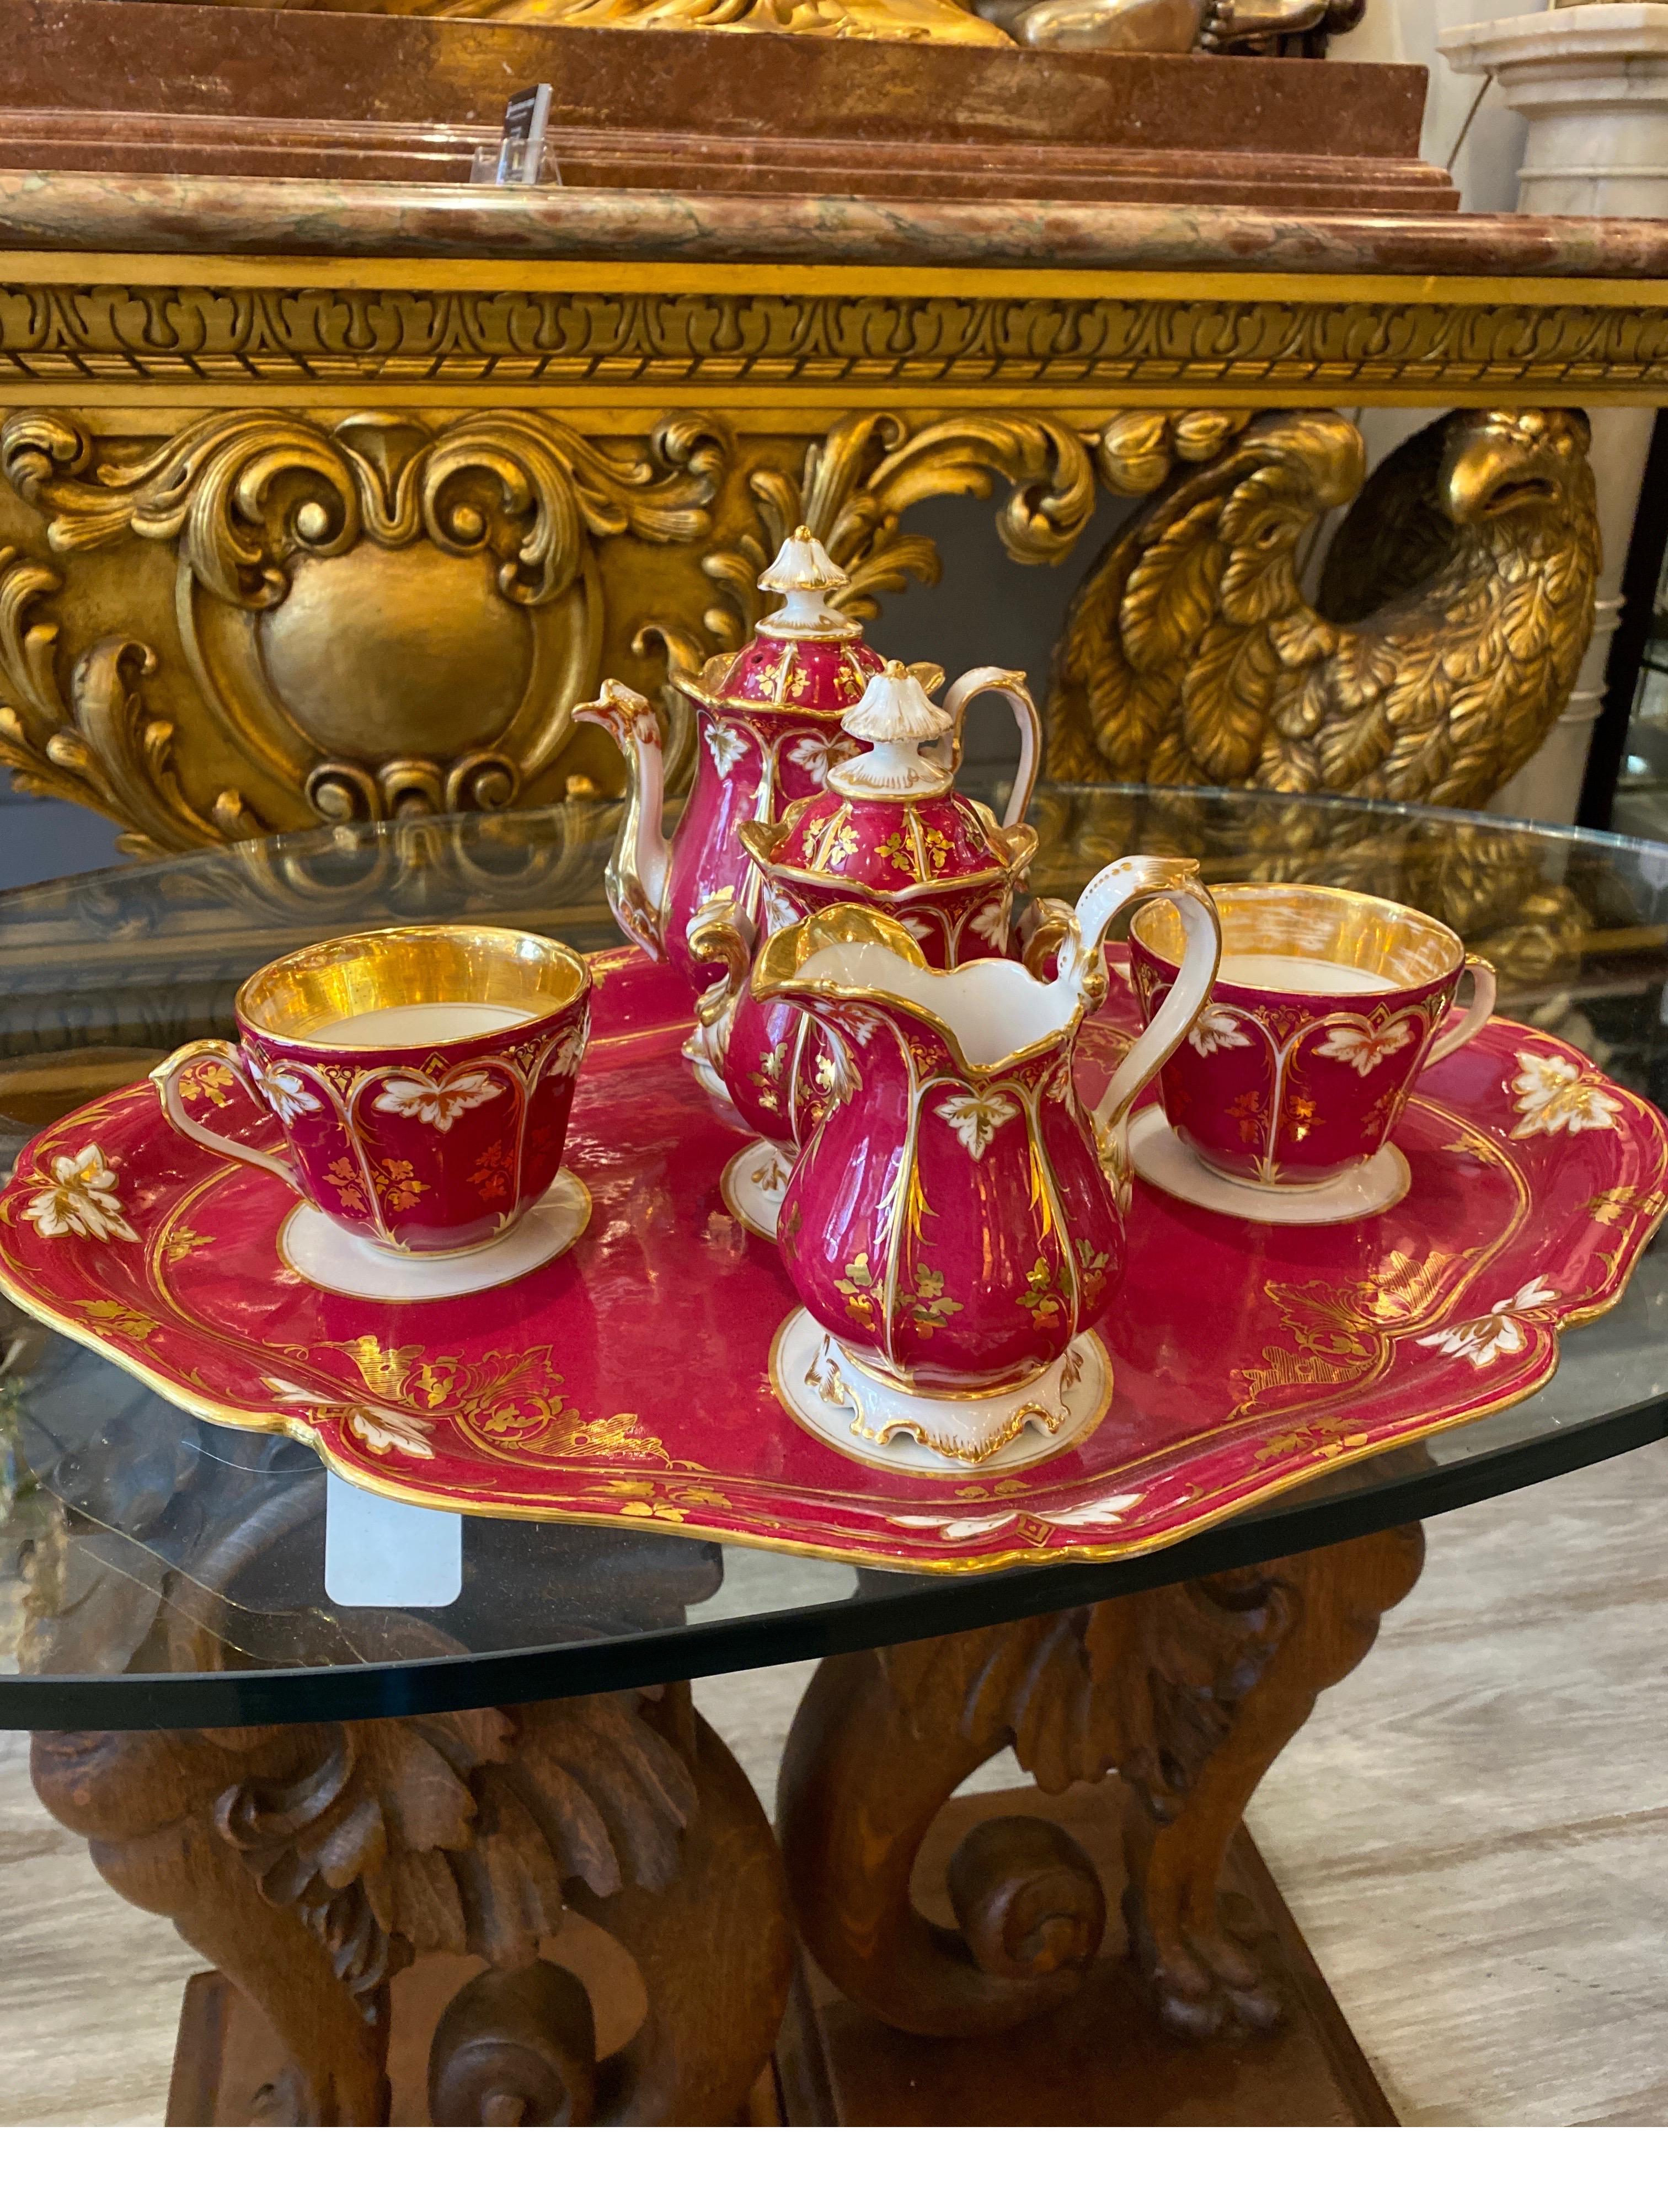 Elegant 19th century porcelain in white gold and crimson raspberry. The teapot with lid, sugar bowl with lid, creamer, two tea cups with tray. The tray measures 17 wide, 12.75 deep and the small tea pot is just 7 inches tall.